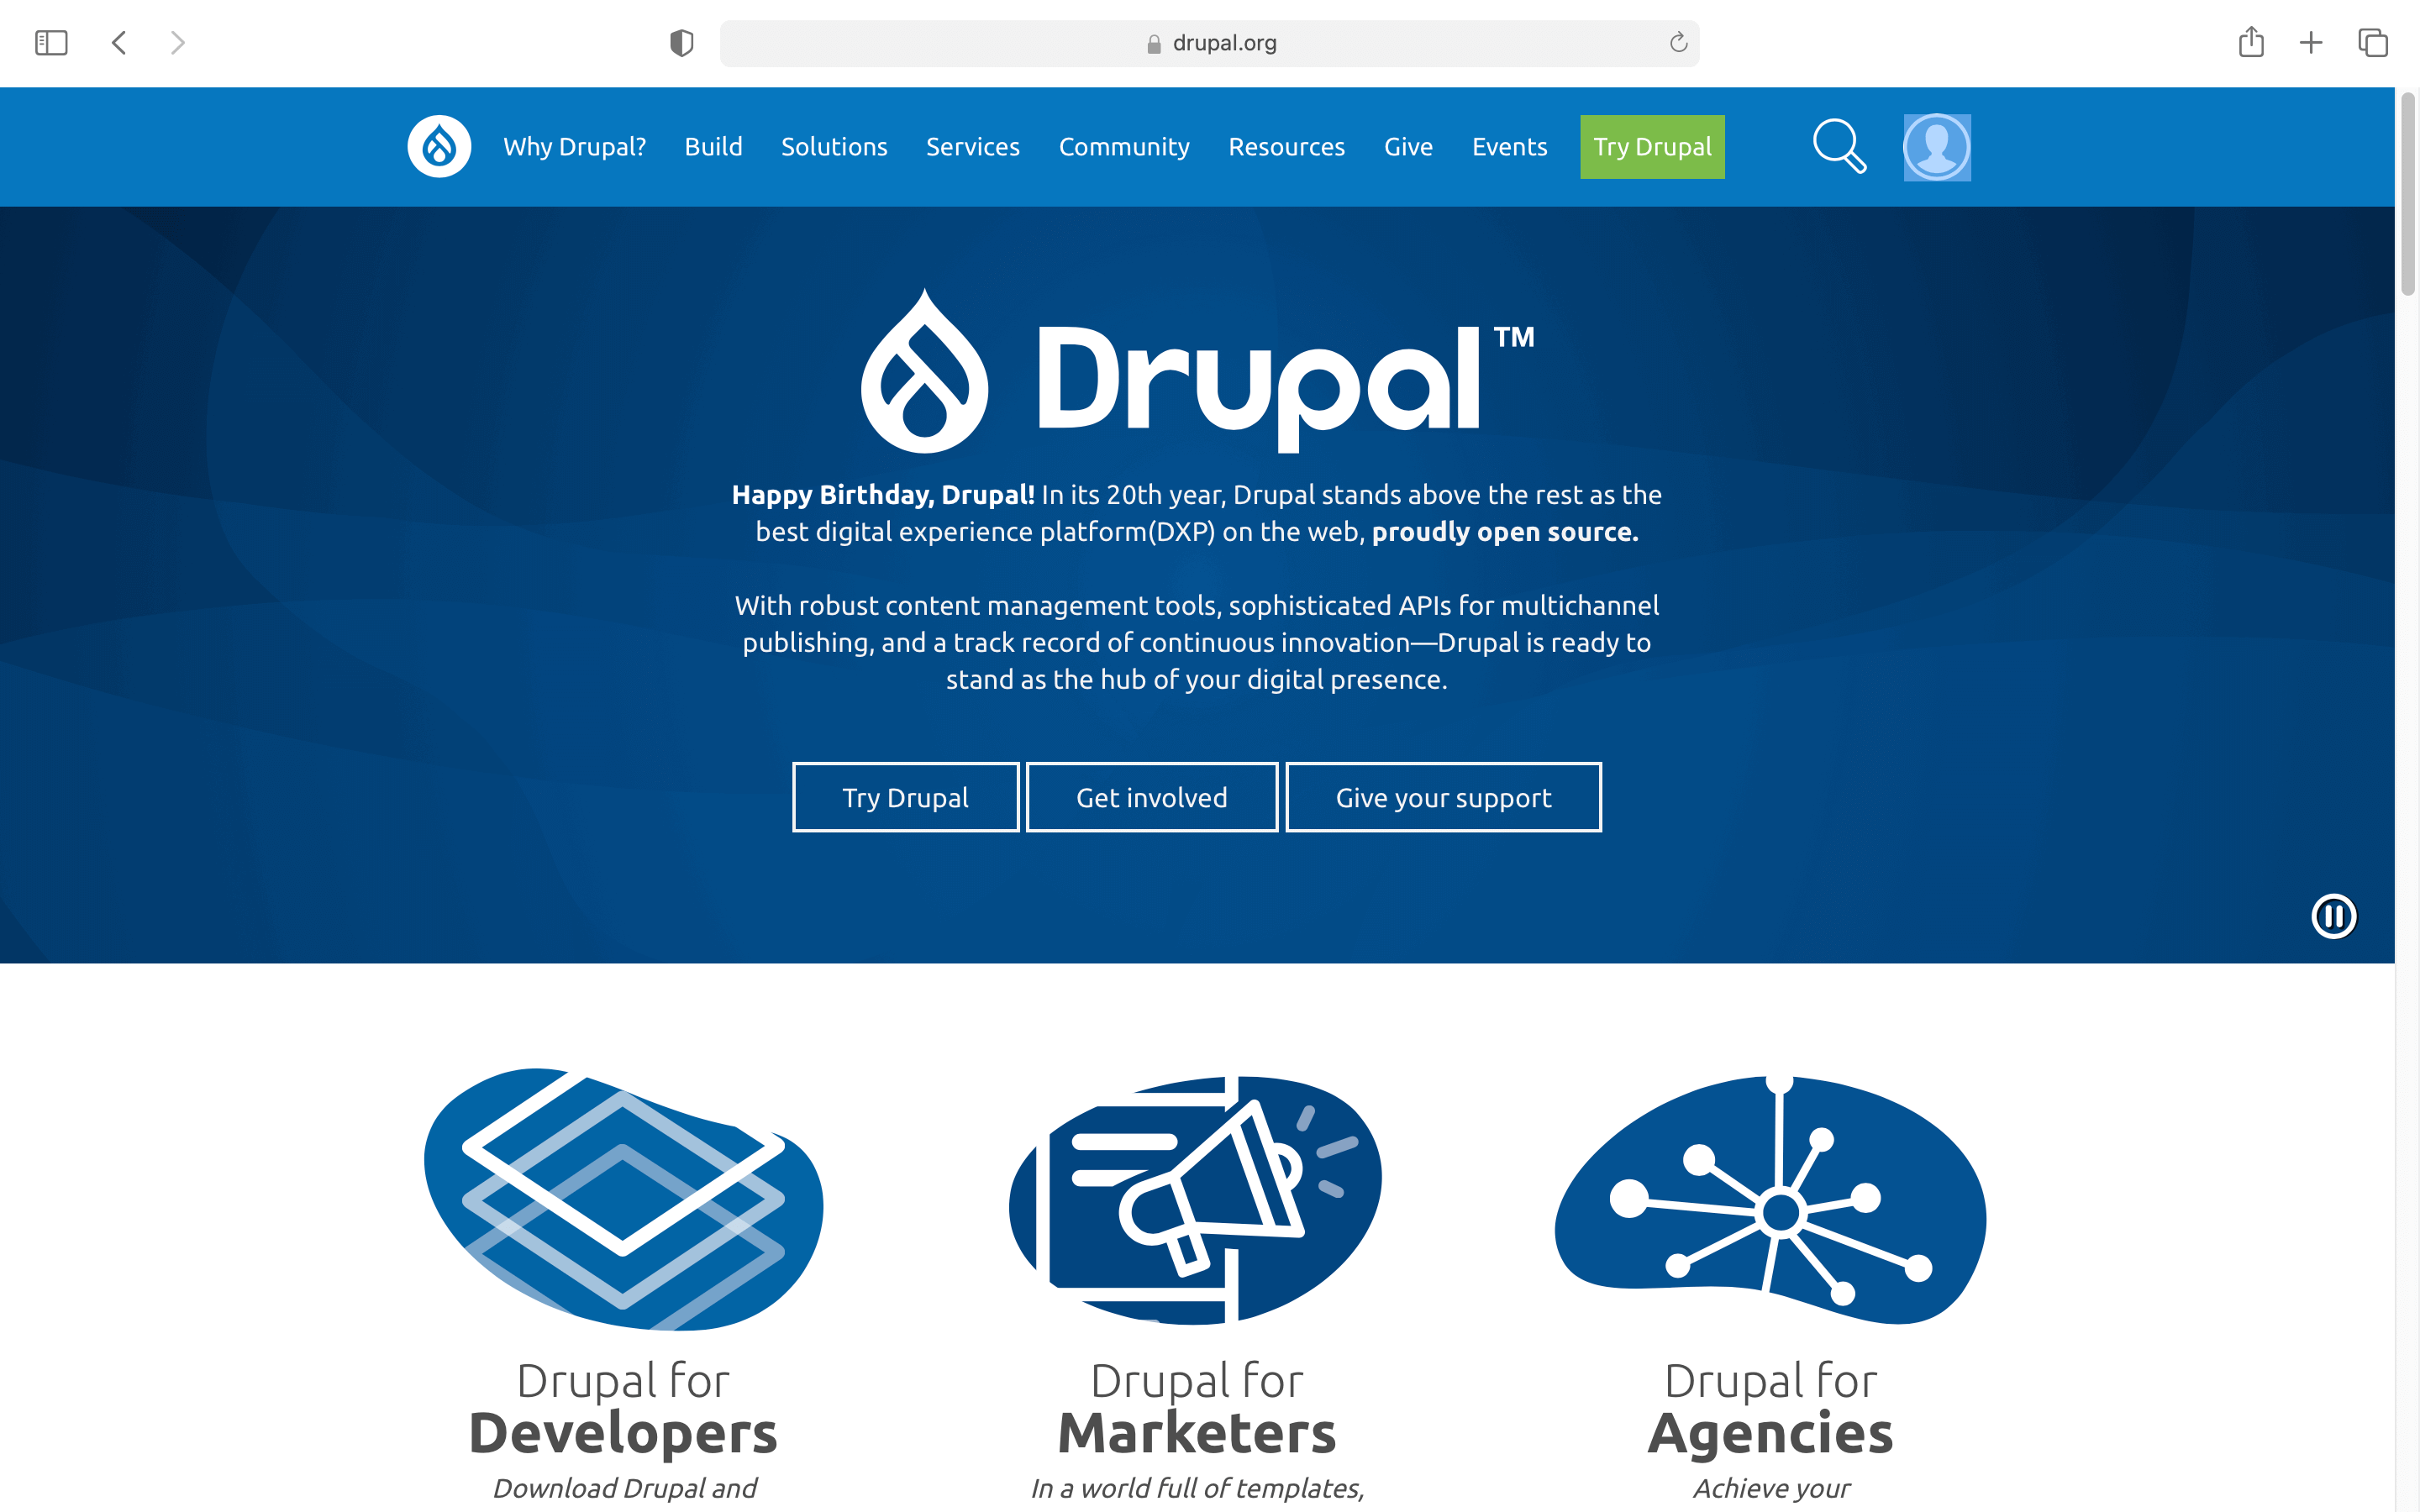 Drupal does not work in China